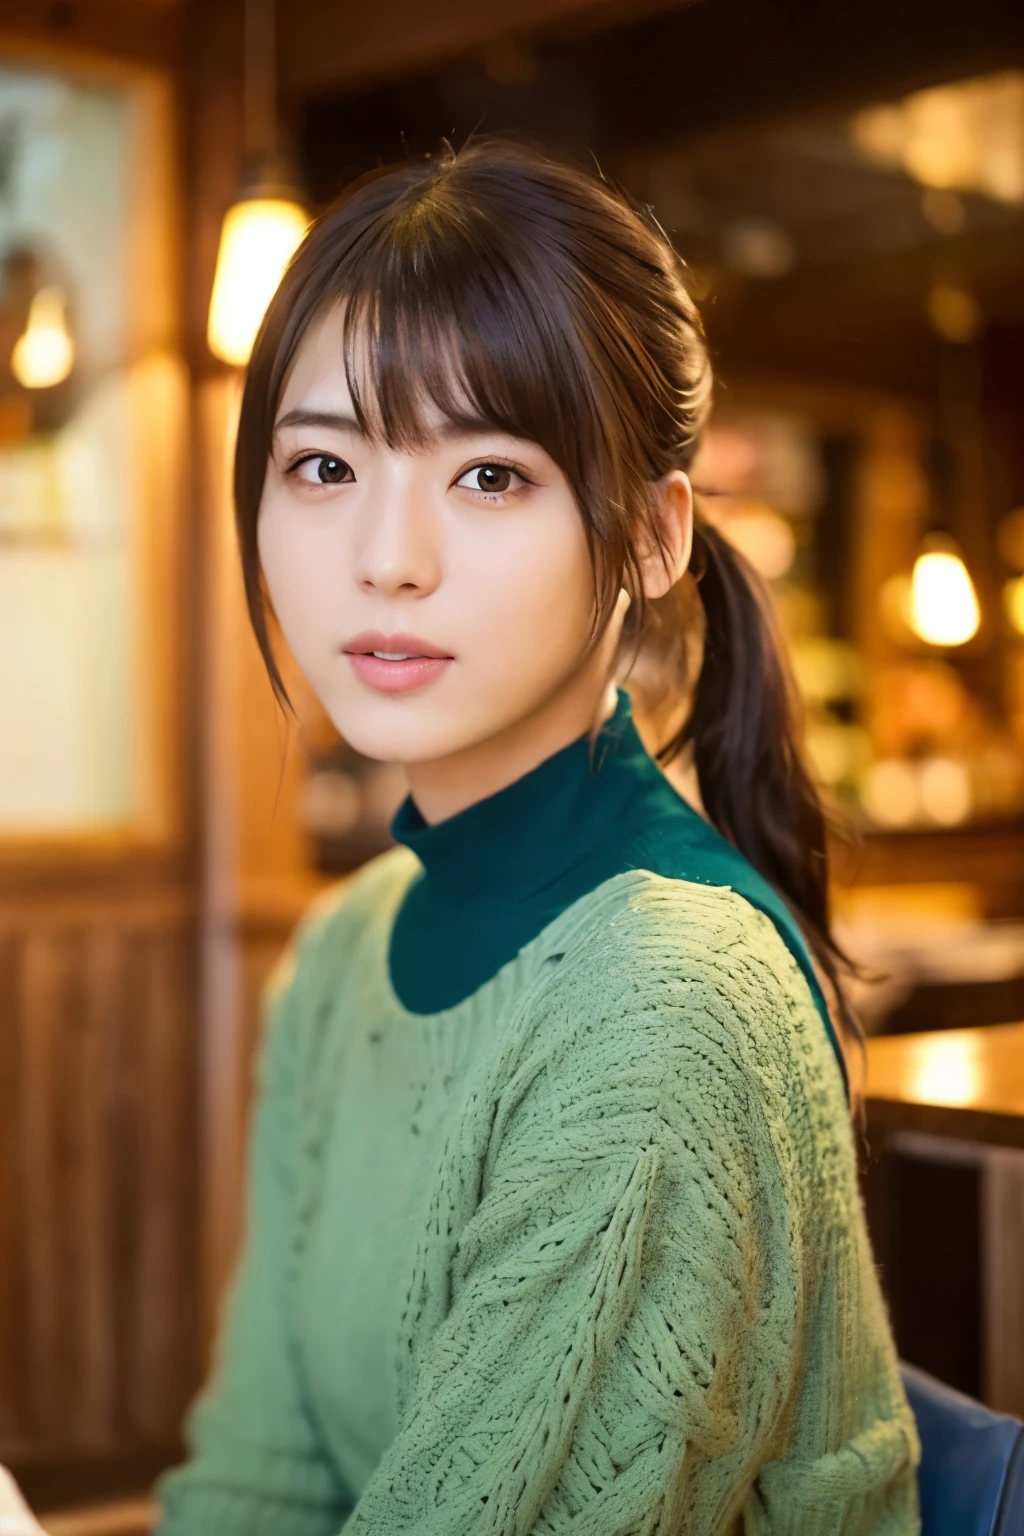 Create a high-quality, realistic portrait of a 30s Japanese woman sitting in a cozy, wooden-themed café. She has straight, dark brown hair with bangs, tied back in a low ponytail. Her expression is friendly and engaging. She is wearing a simple, short-sleeved, dark green-blue dress. The background features wooden paneling and a warm, ambient light from a lamp in the corner. Photo must be a masterpiece in quality expressing correct human structure, detailed face, and detailed eyes.